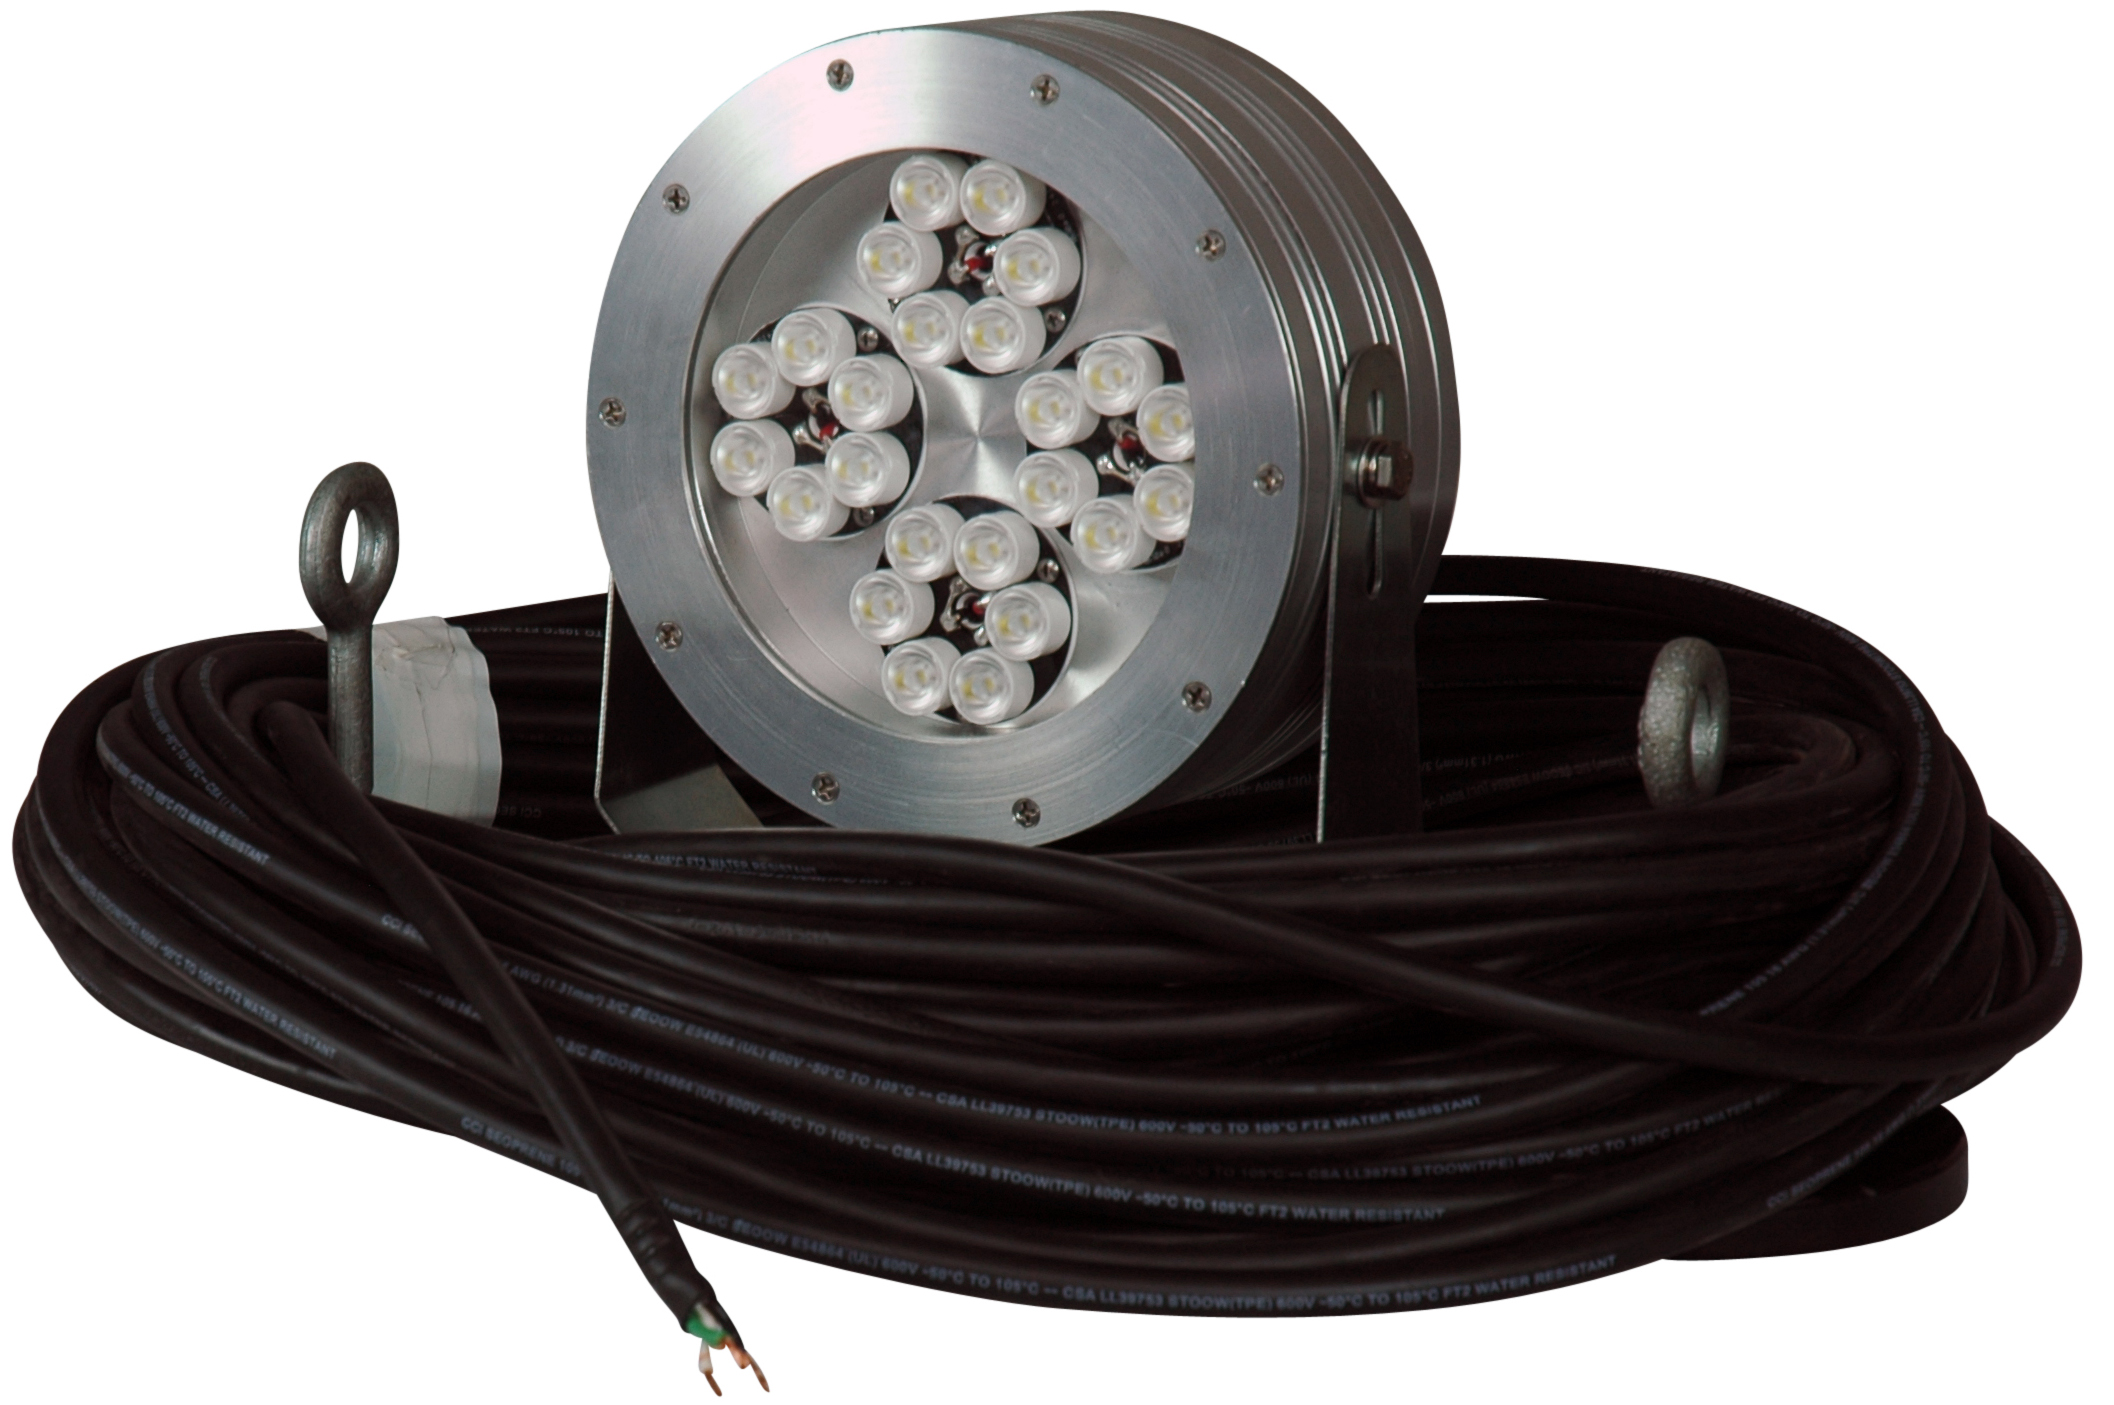 31 Watt Low Voltage LED Light Fixture with Magnetic Mount for use within Hazardous Locations